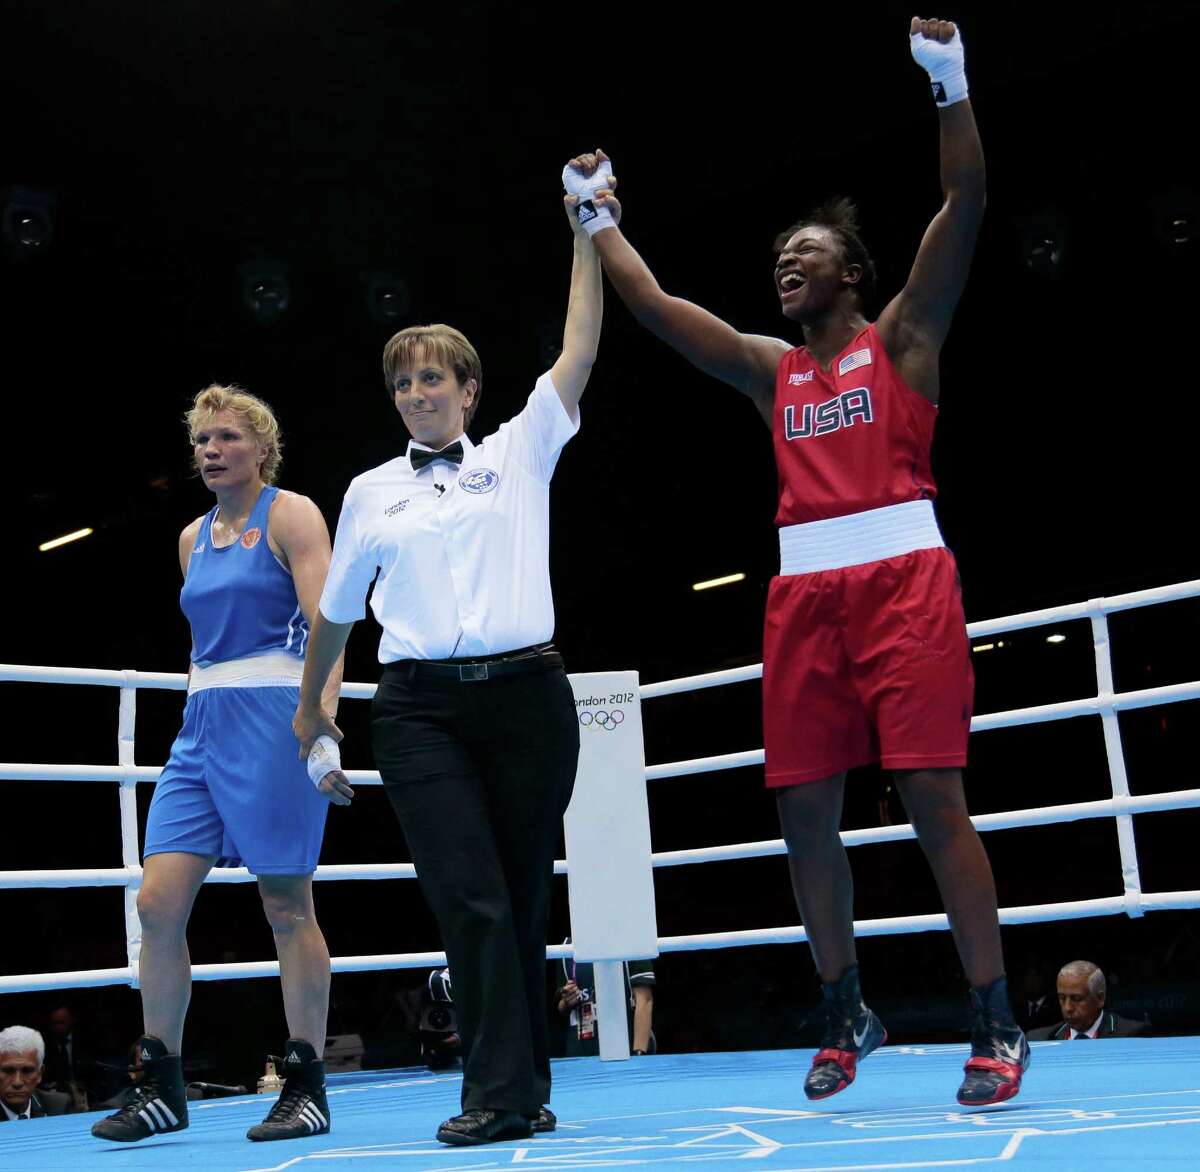 Claressa Shields (right) celebrates winning gold against Russia’s Nadezda Torlopova in the women’s middleweight division. The American men failed to medal for the first time.